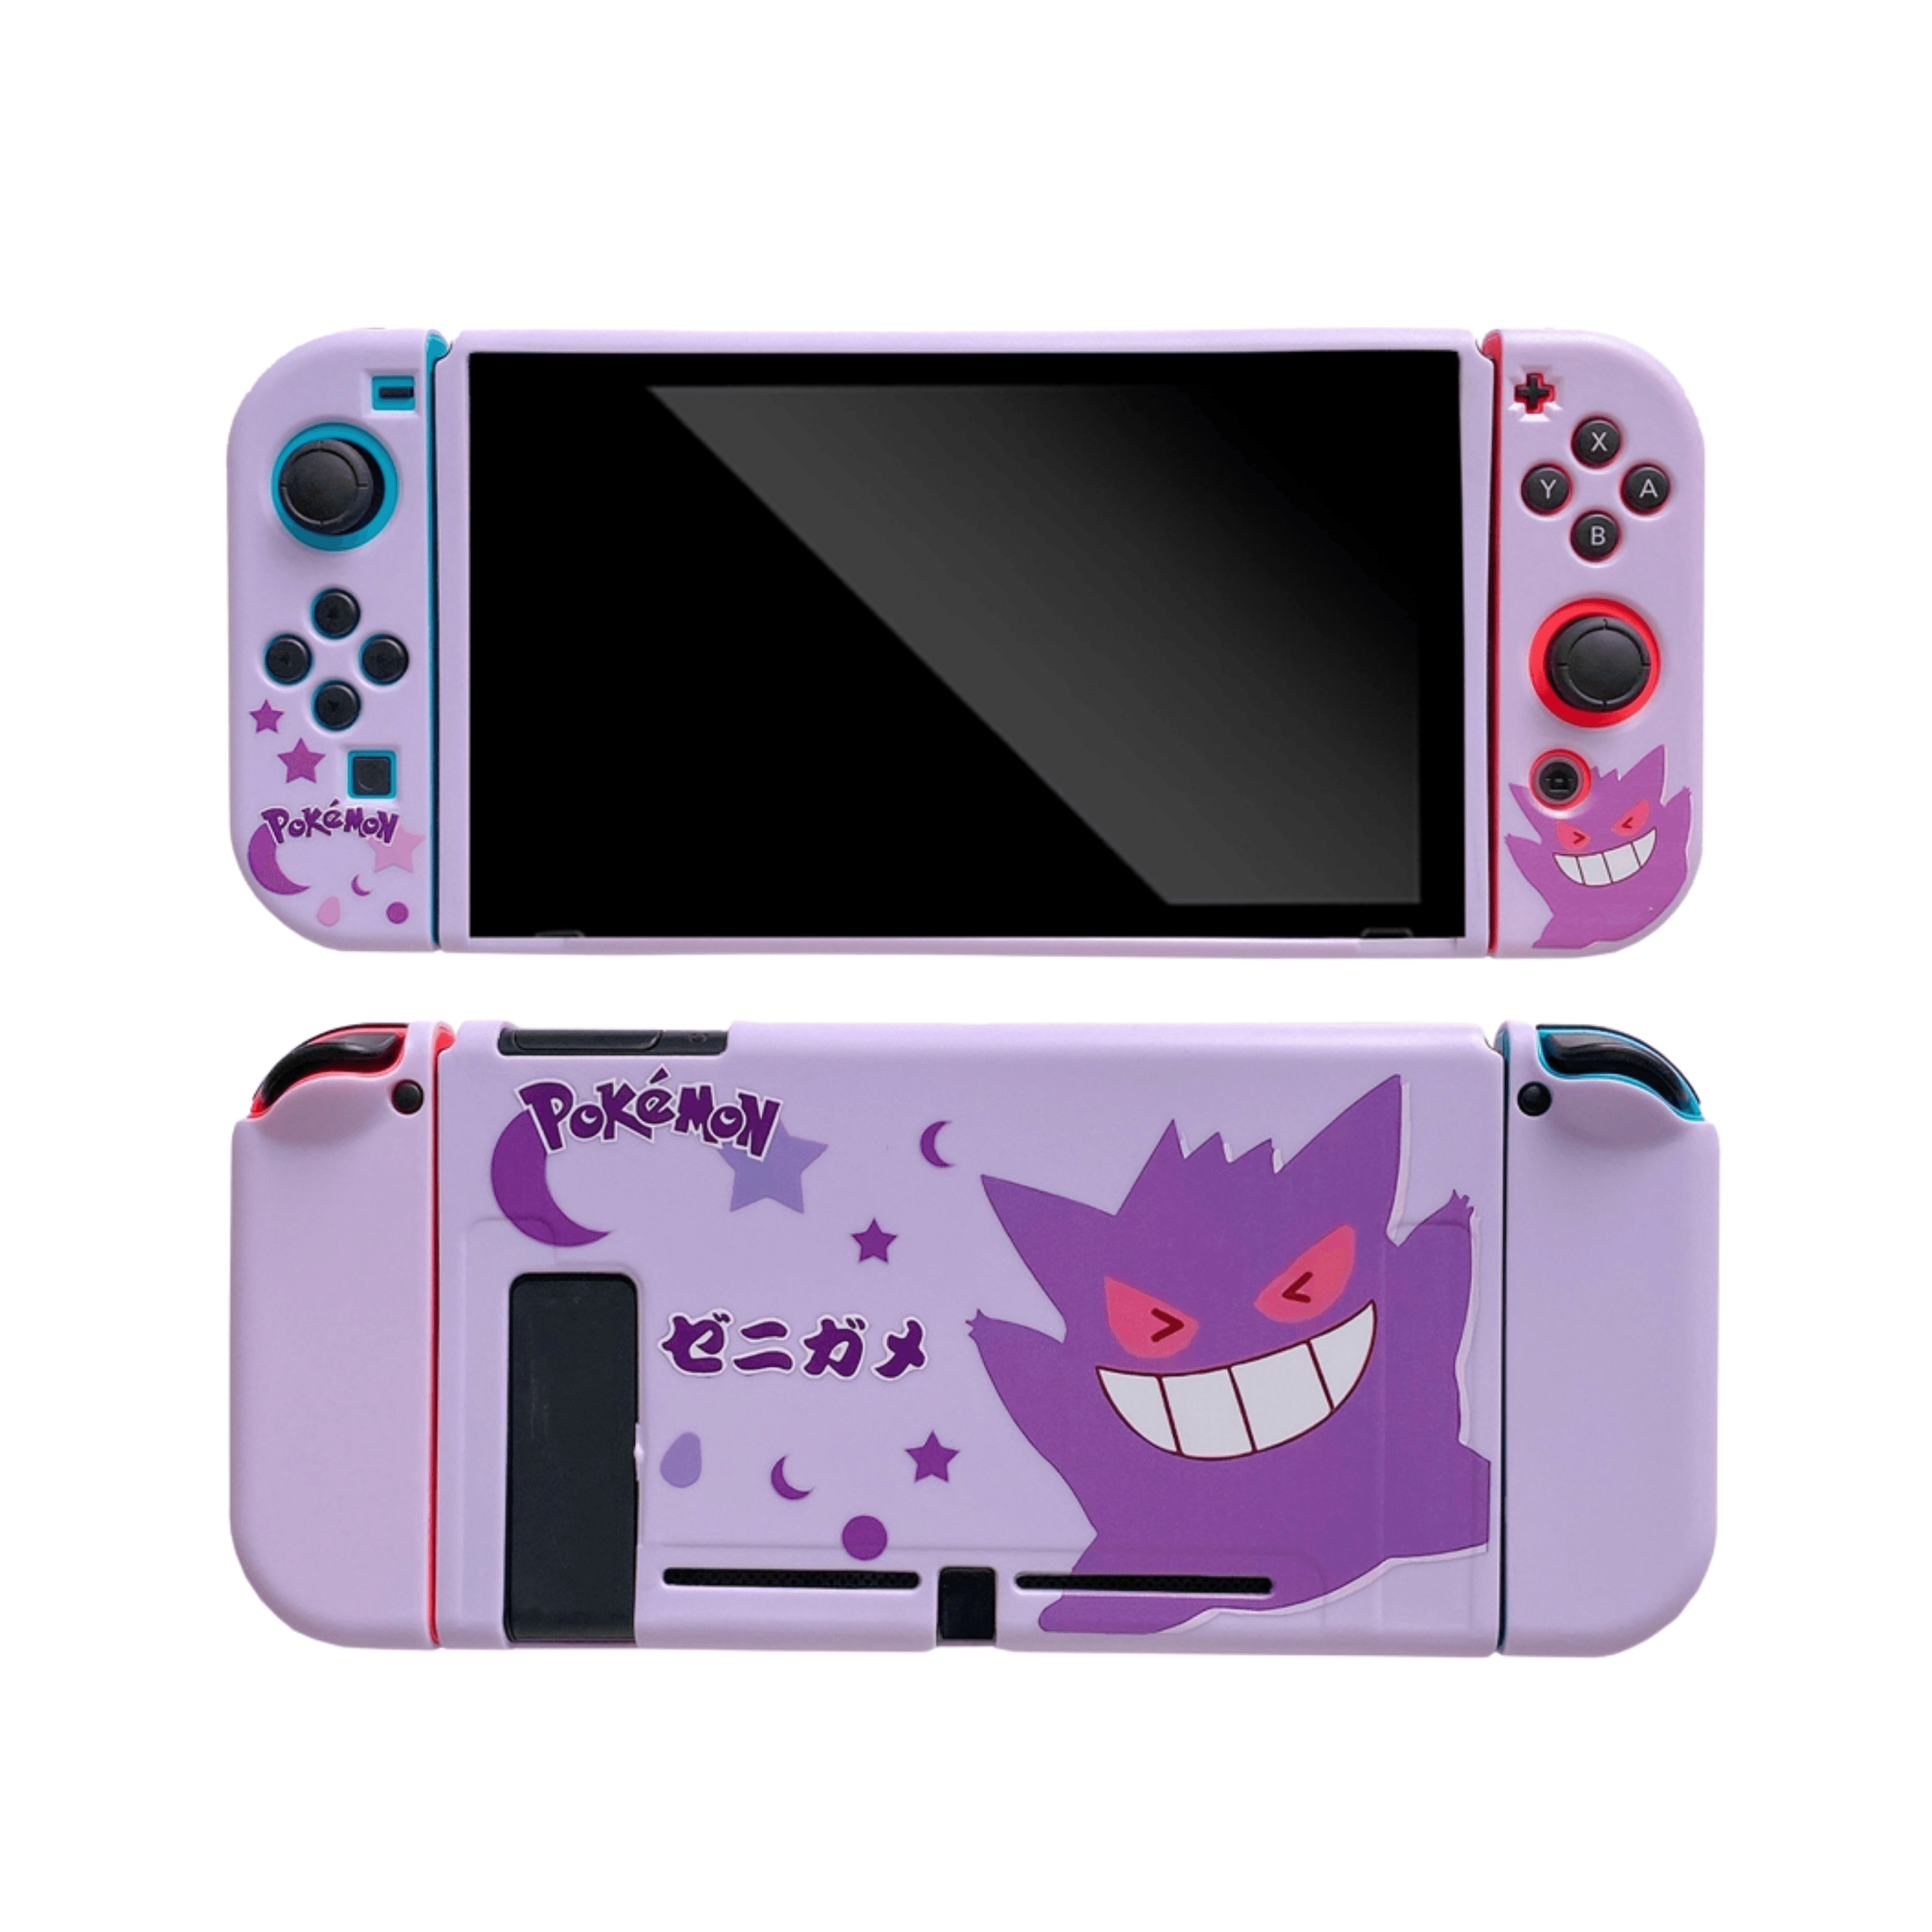 Nintendo Switch Skins Anime Discount - tundraecology.hi.is 1696296299